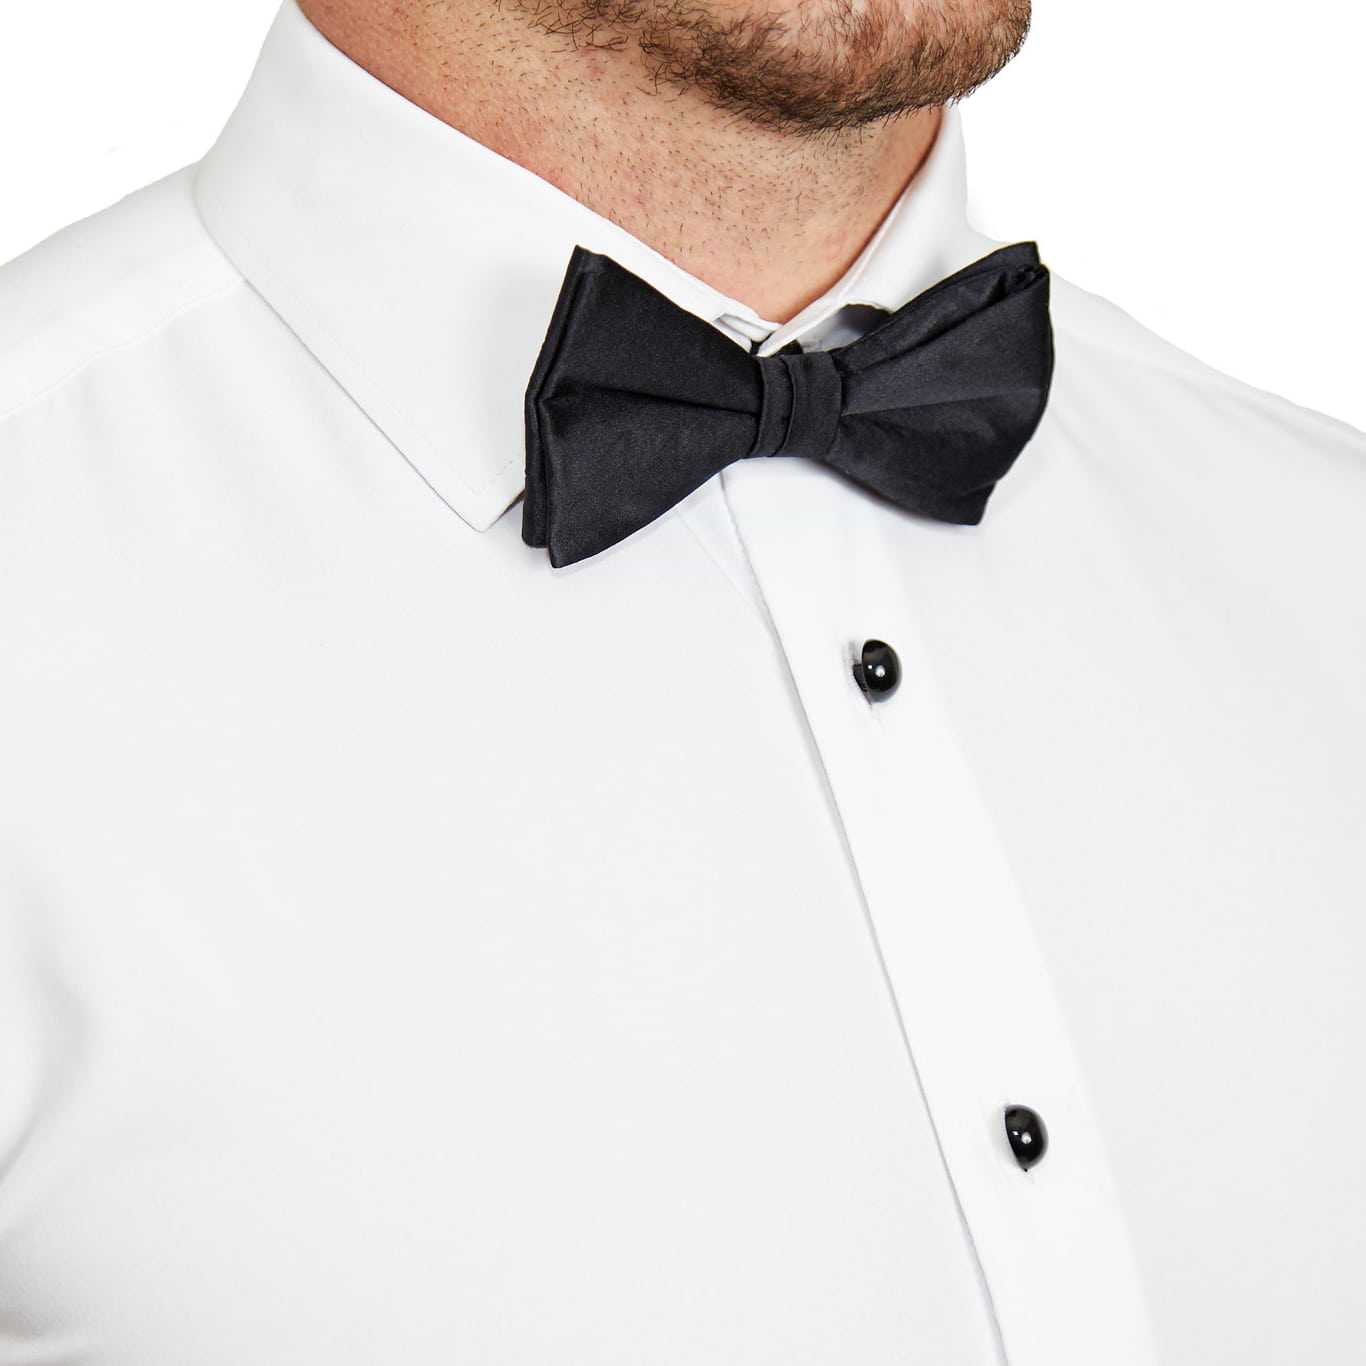 The Solid White Tuxedo Shirt - Made to Order